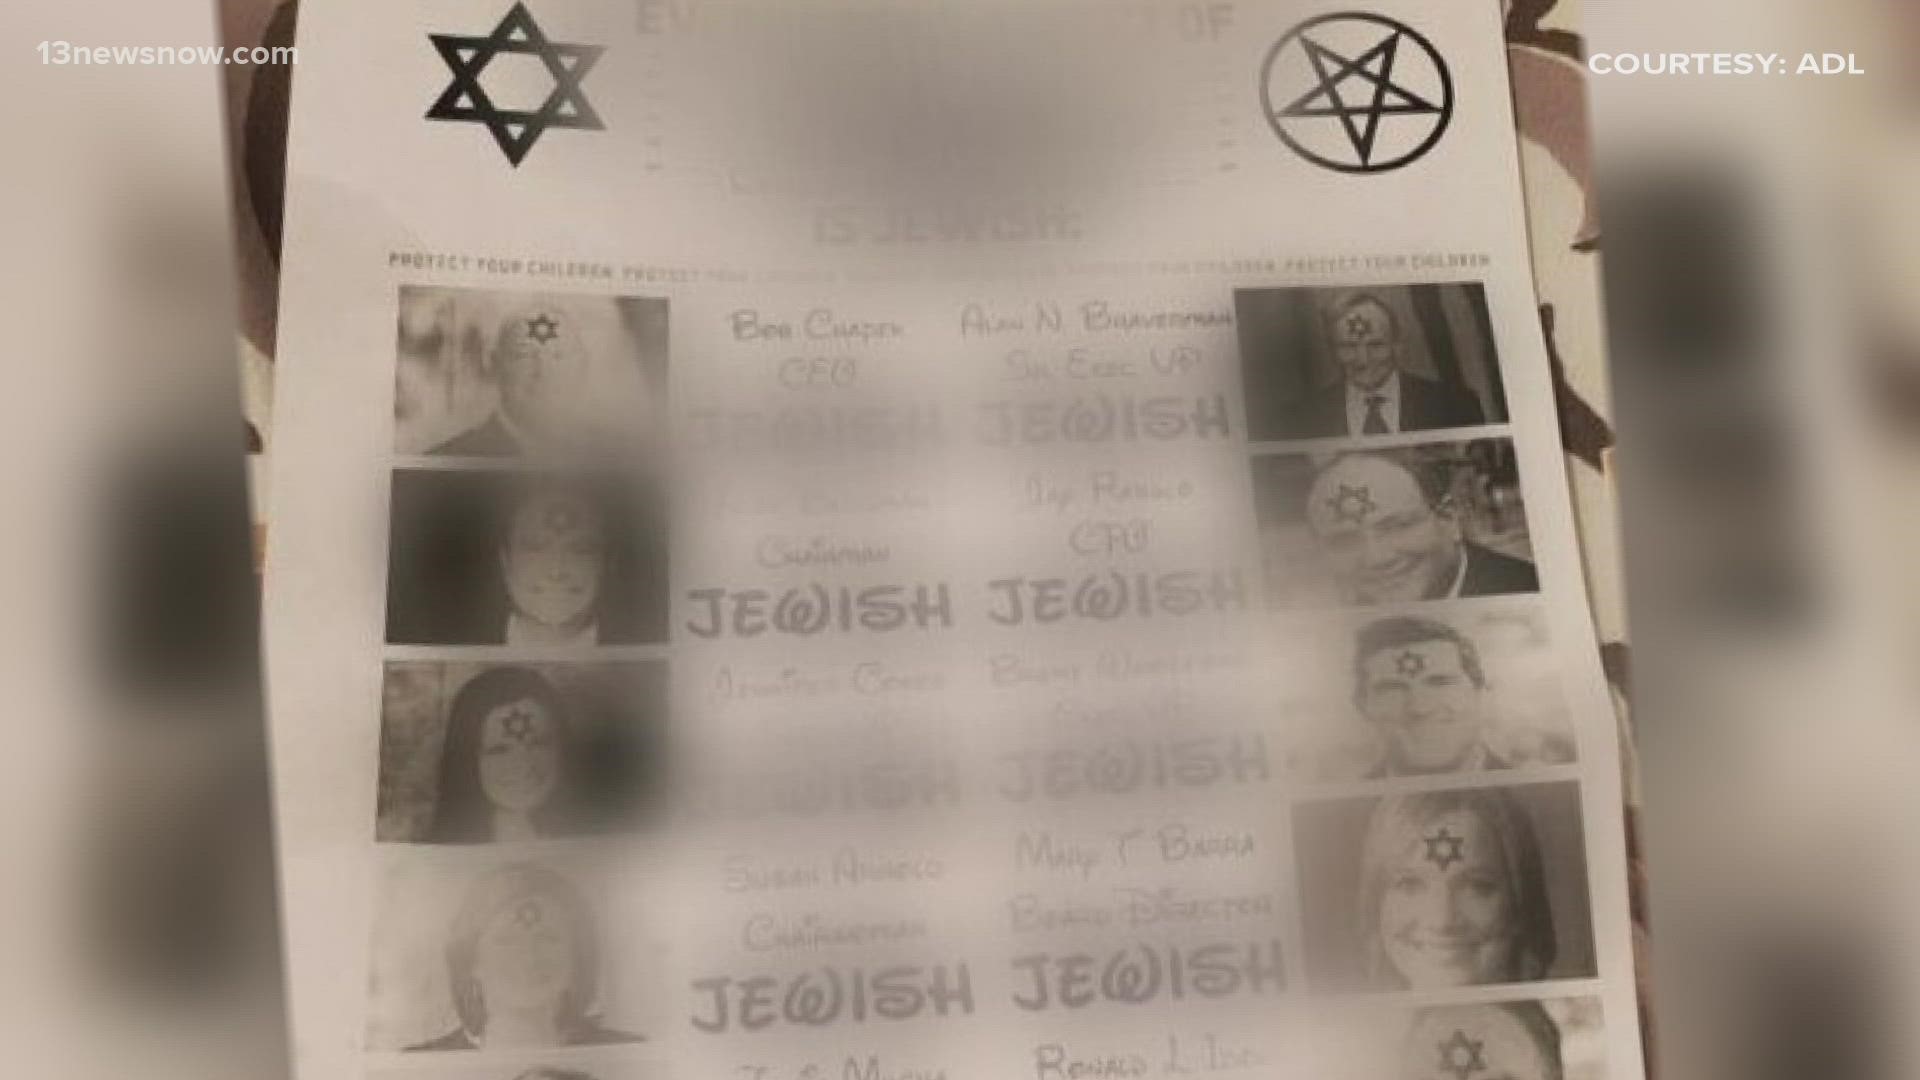 The Anti-Defamation League says the flyers came from a group called the Goyim Defense League, a loose network of people connected by their antisemitic beliefs.